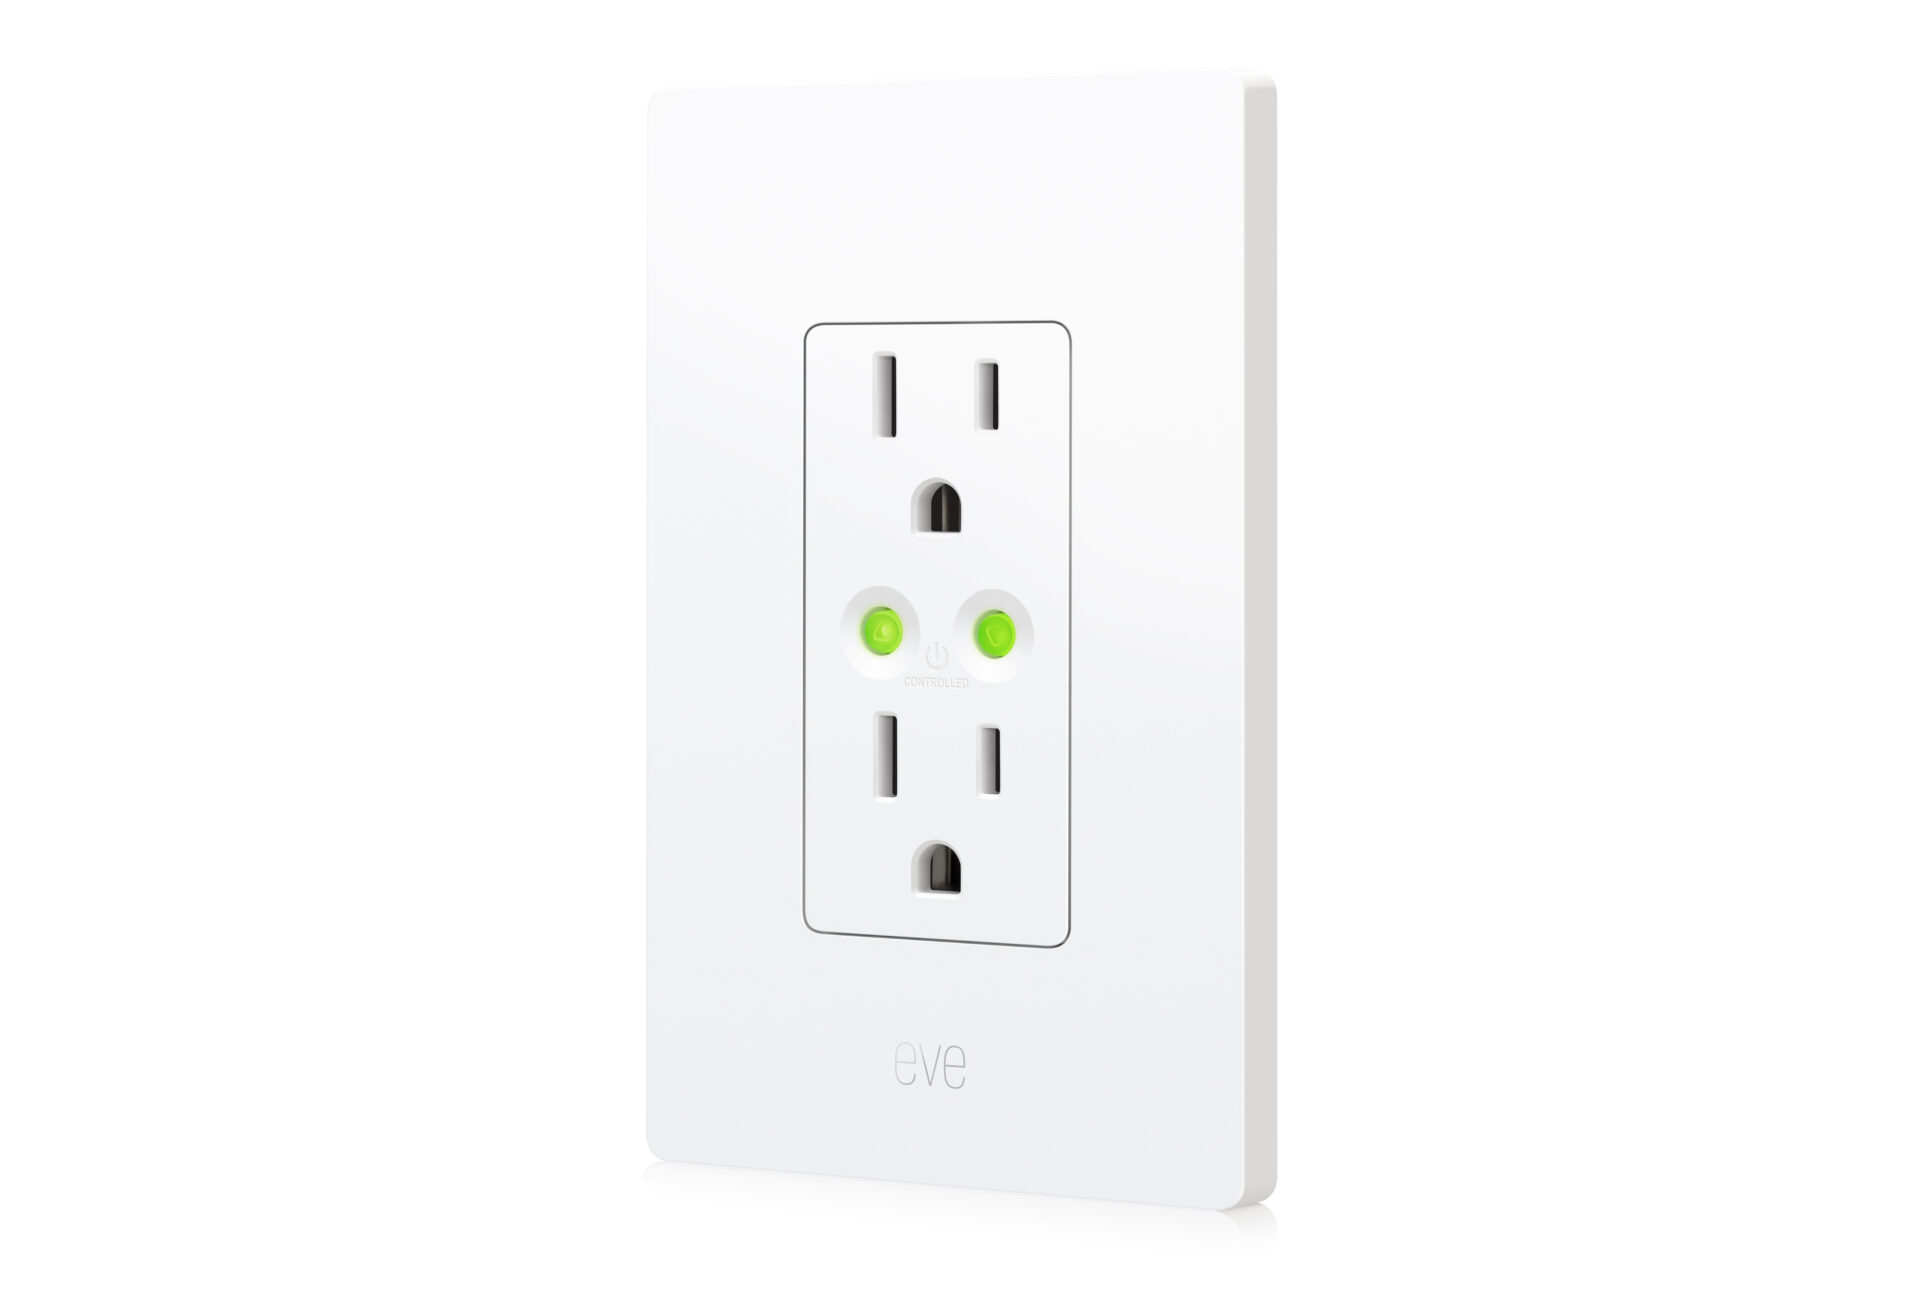 Eve's new wall outlet product side shot